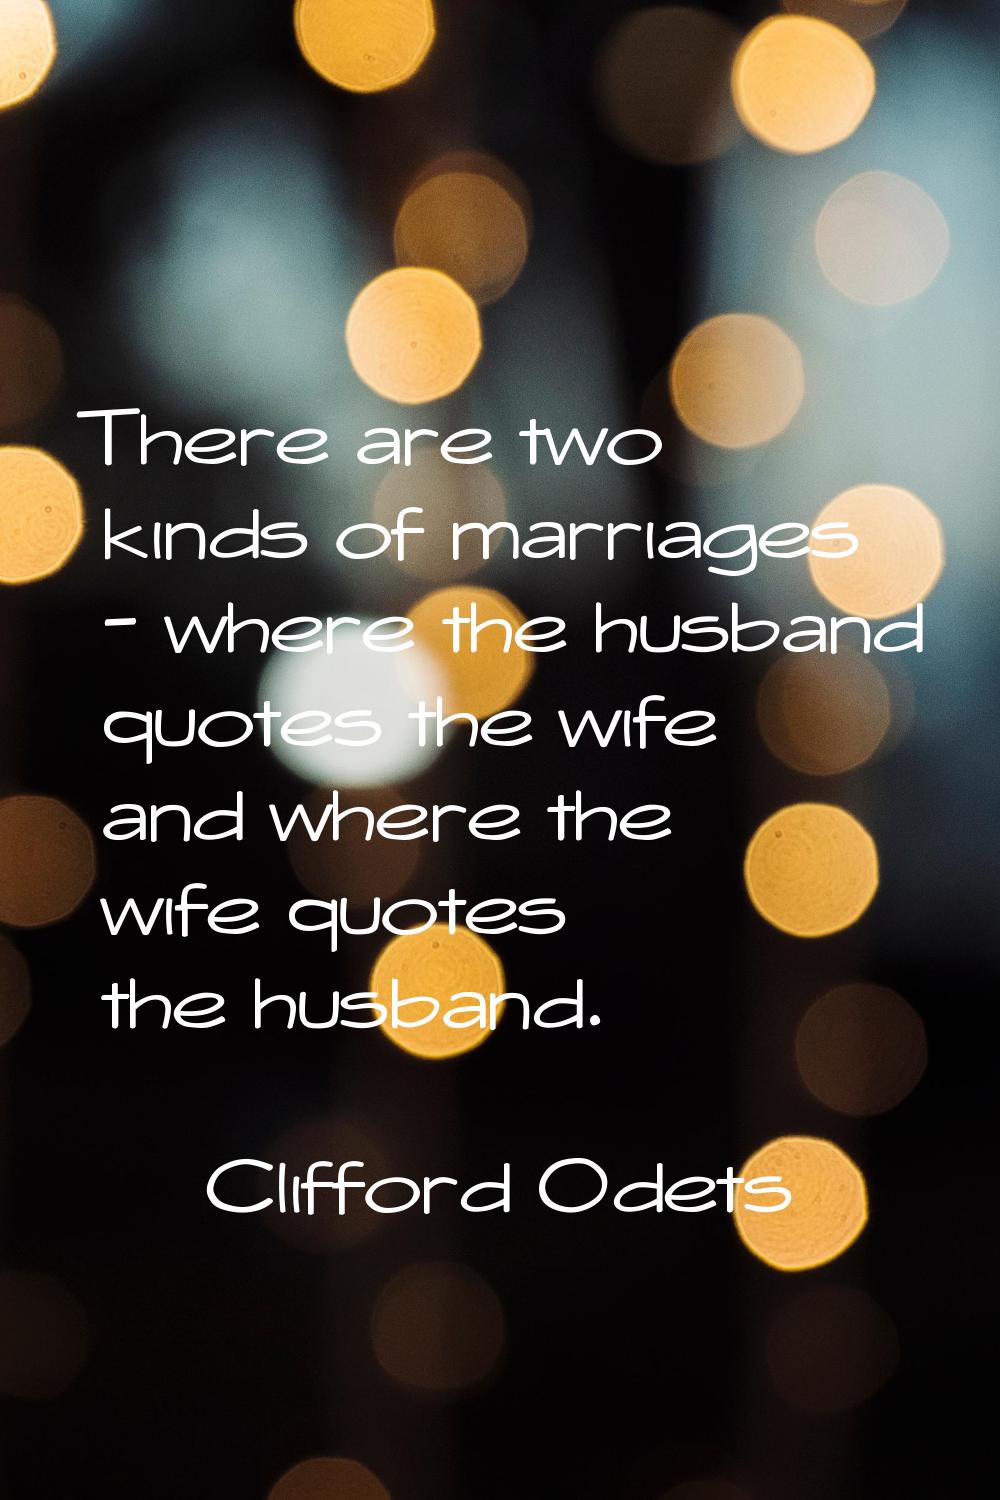 There are two kinds of marriages - where the husband quotes the wife and where the wife quotes the 